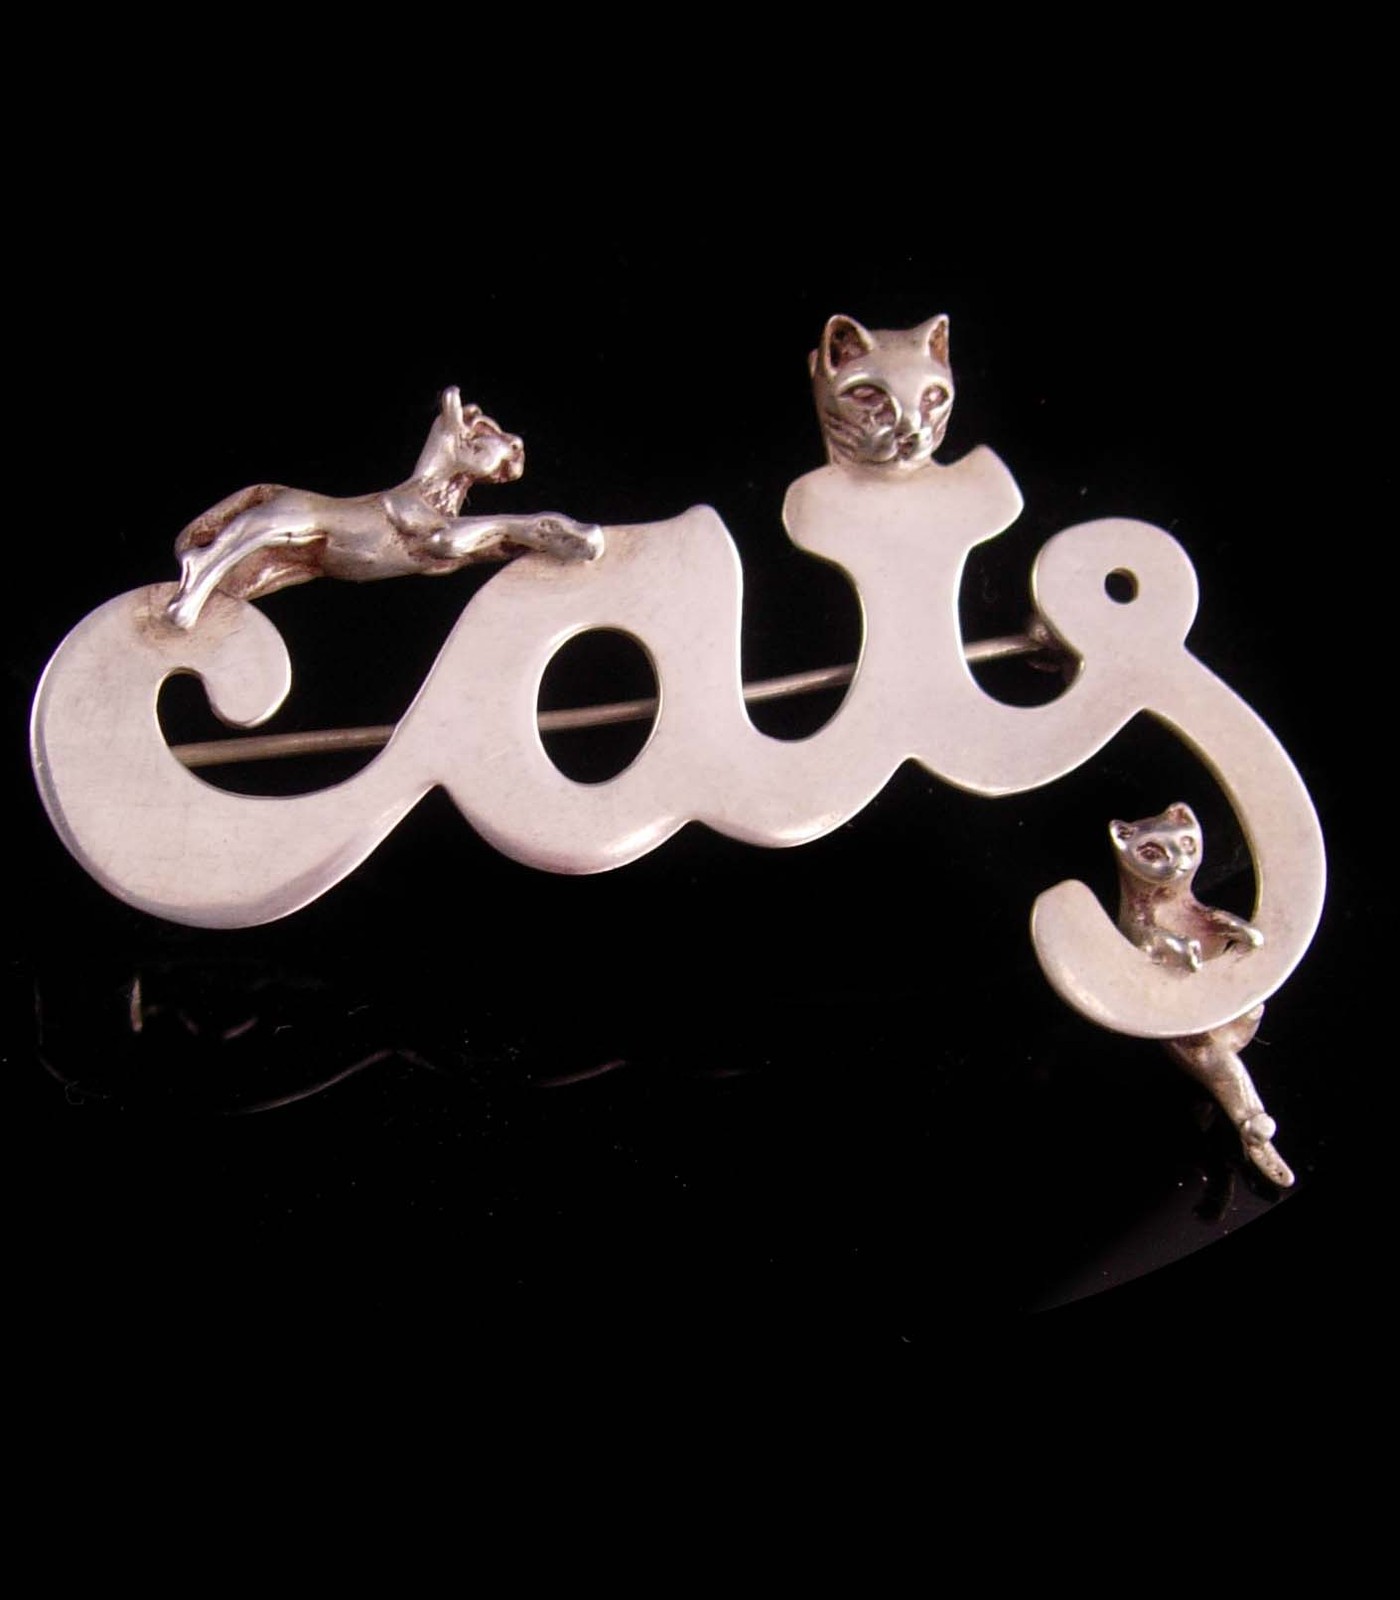 Primary image for Large sterling Cats Brooch - signed meow Kitty - Sterling silver - Whimsical lap